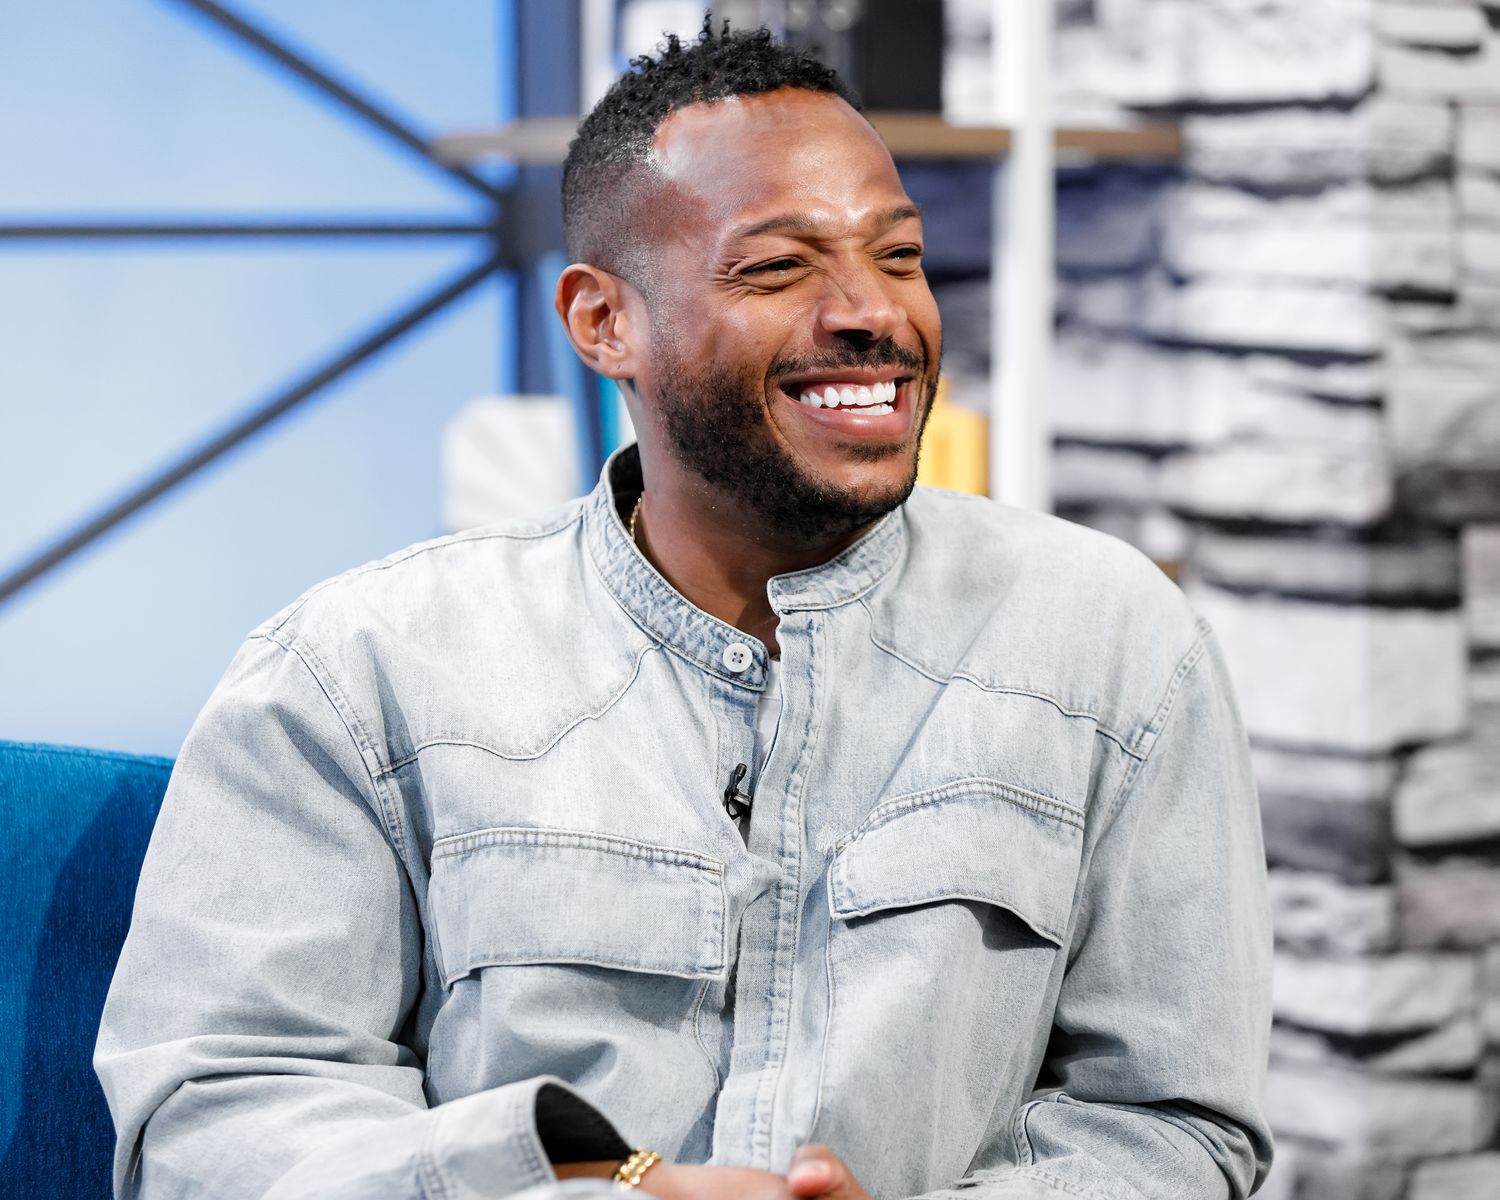 Actor Marlon Wayans at 'The IMDb Show' on July 15, 2019 | Photo: Getty Images